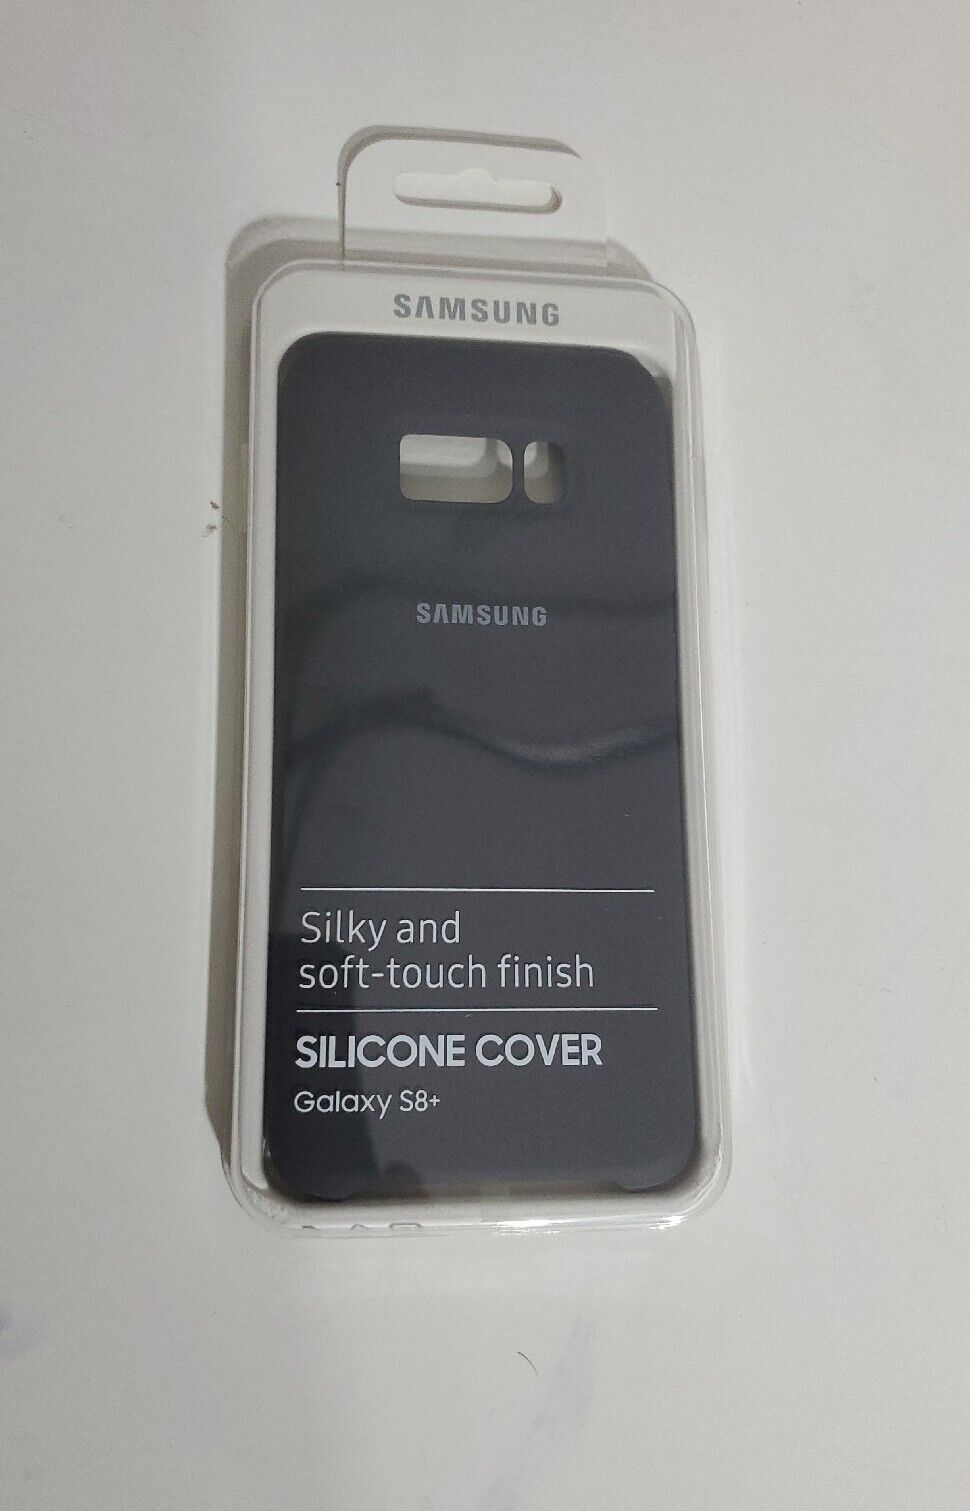 Samsung Galaxy S8+ Official Soft-Touch Silicone Cover Case | EF-PG955TSEGWW